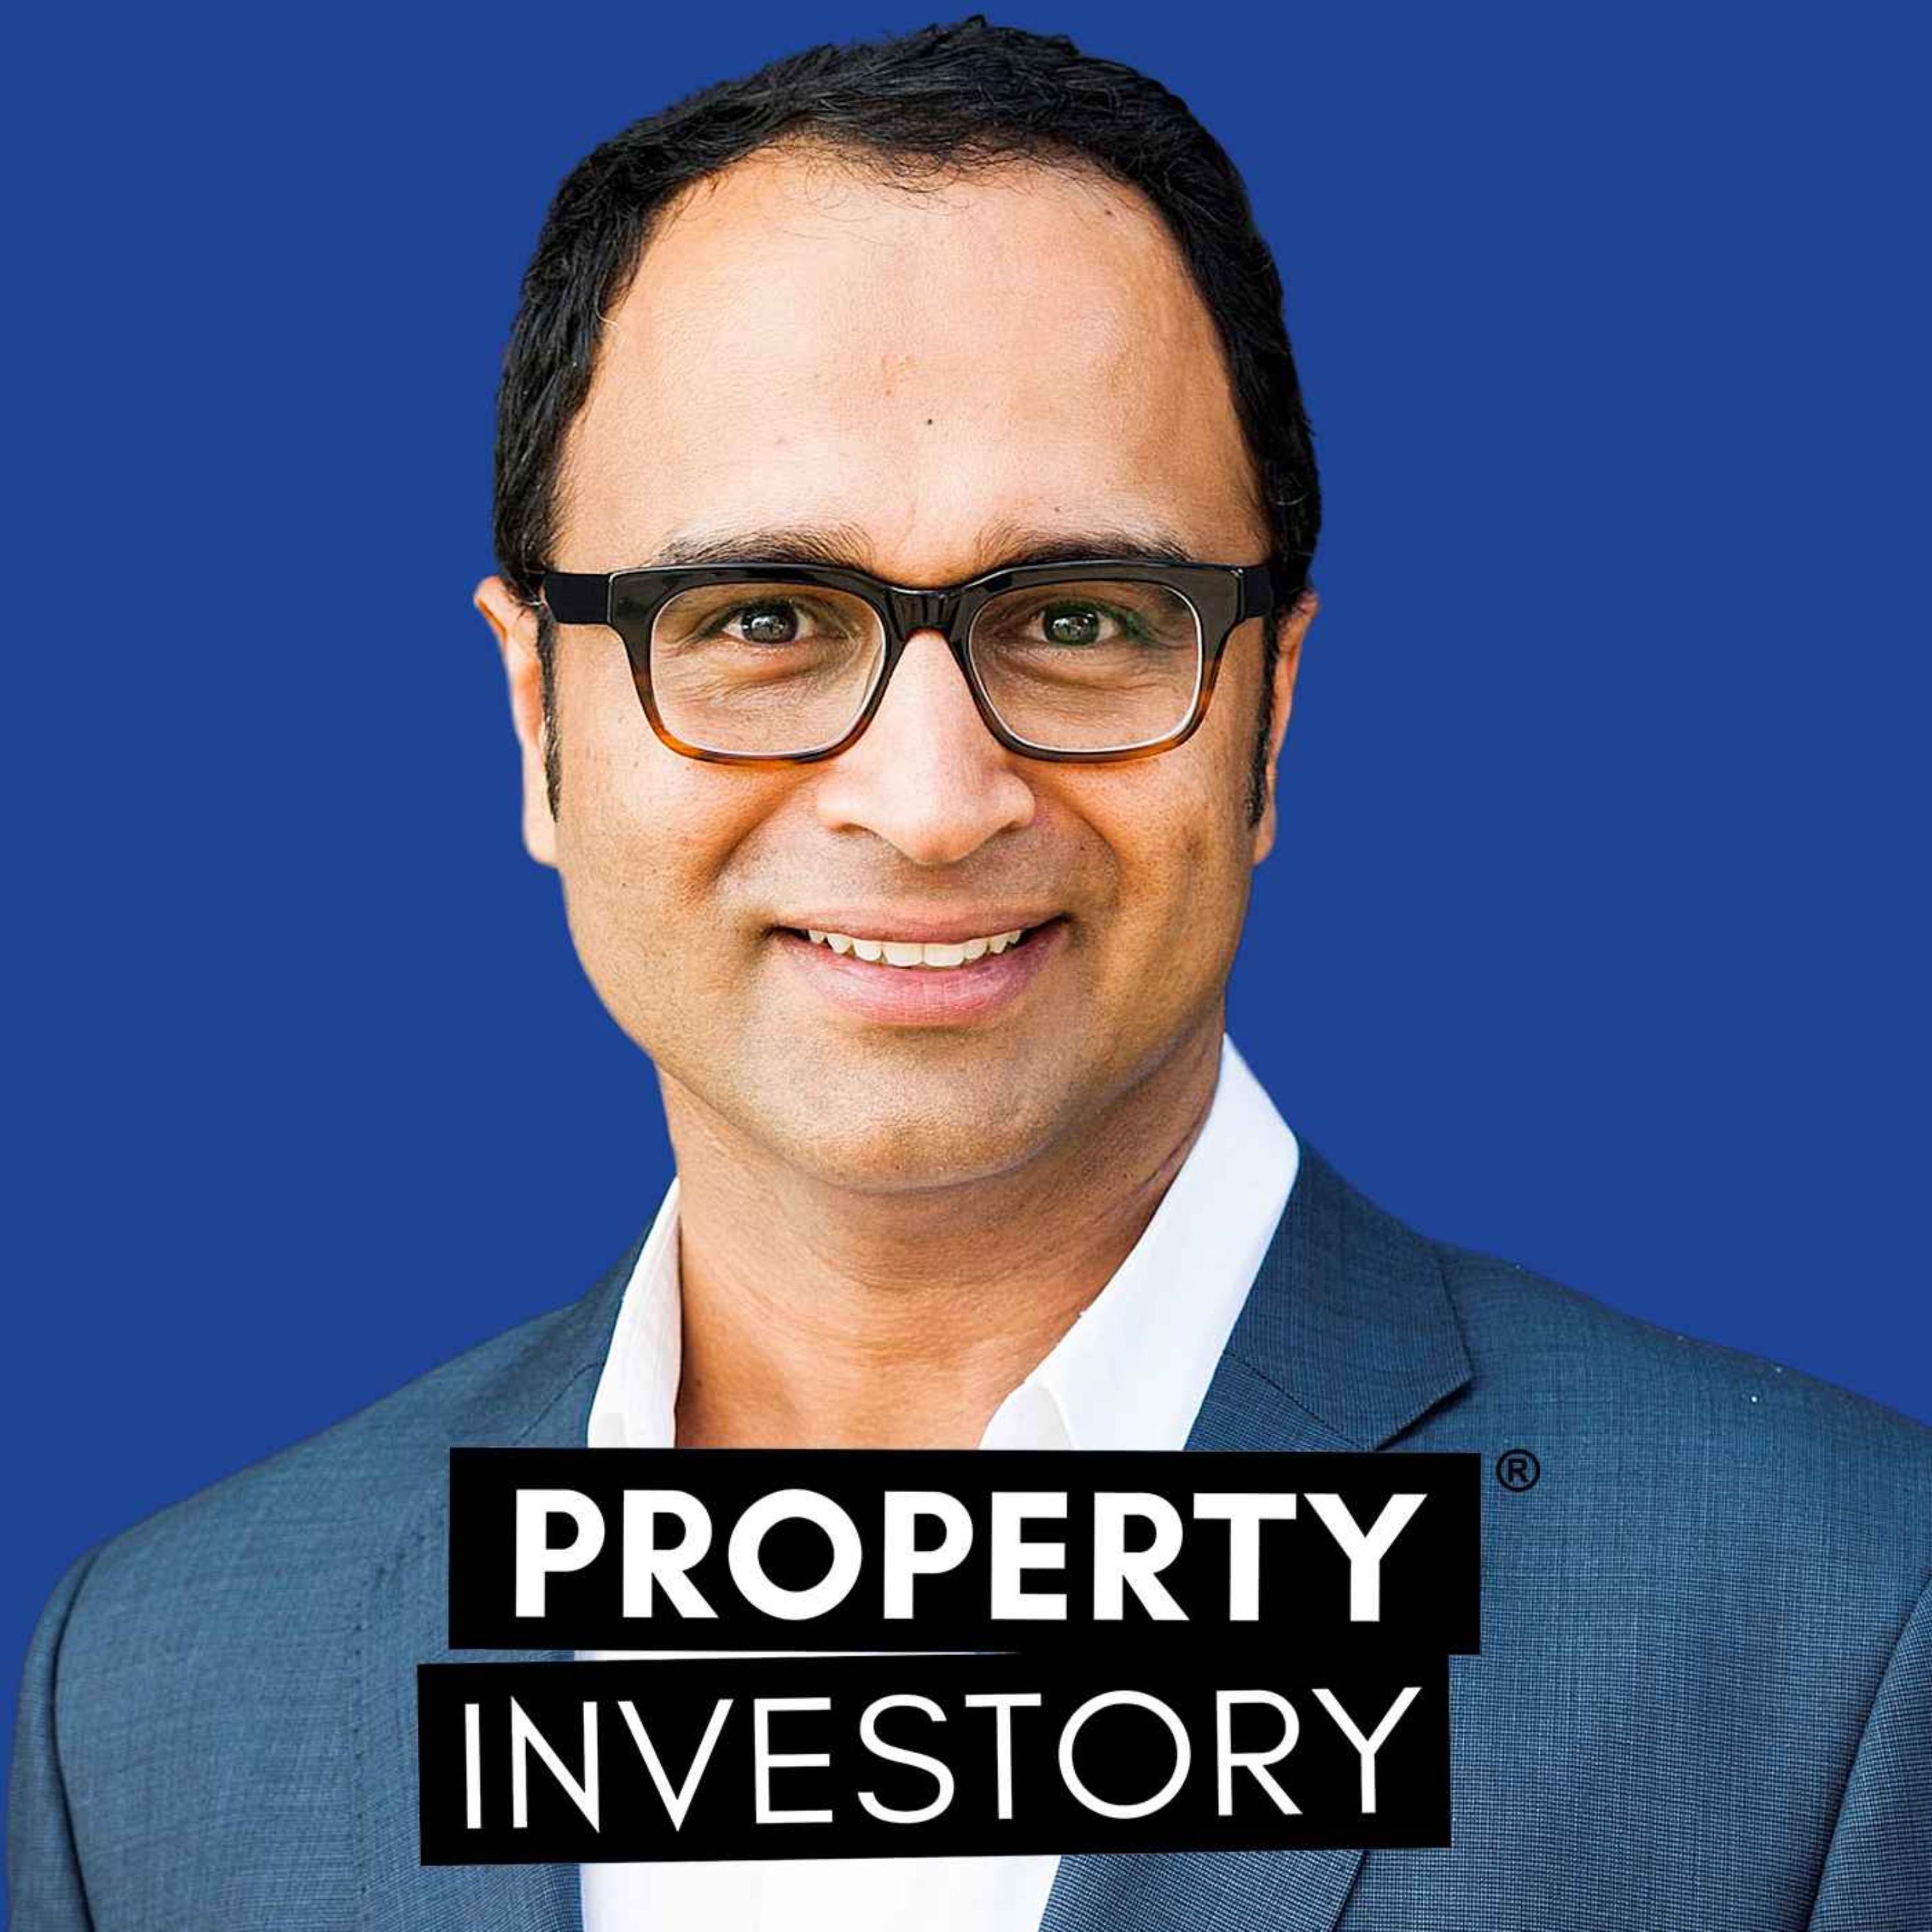 How A Property Search Can Build A $6 Million Portfolio